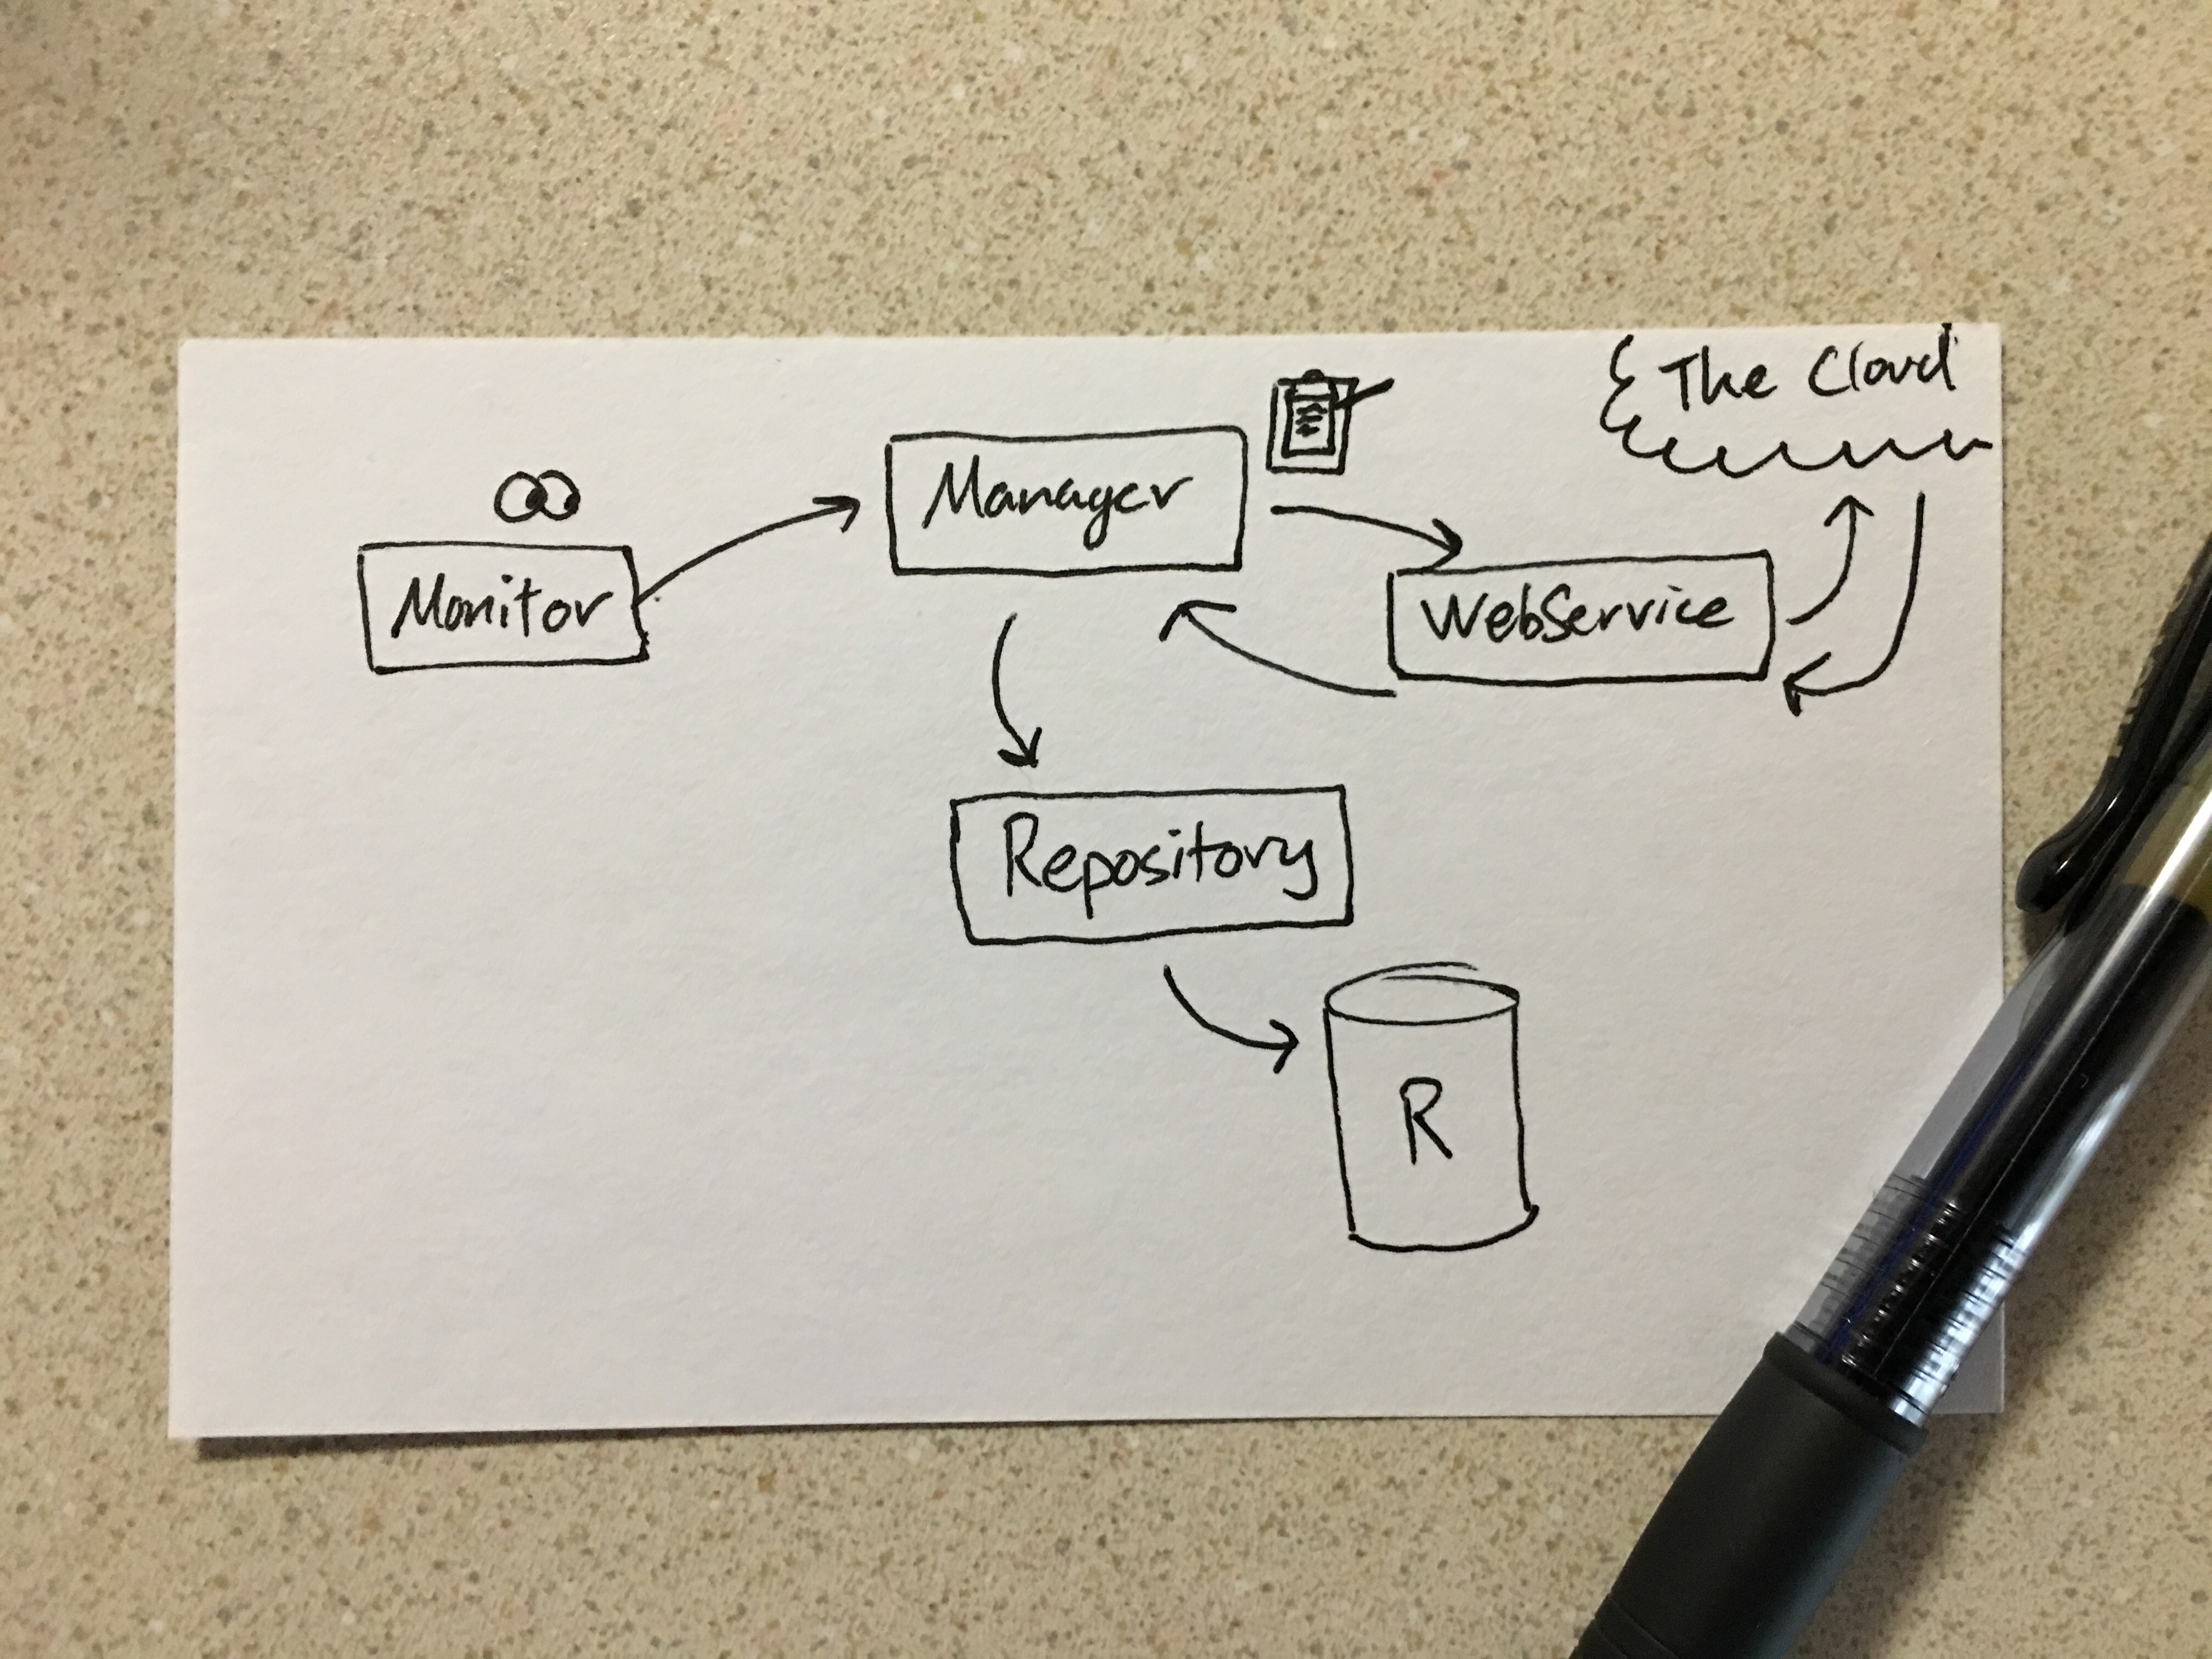 The low-fidelity software architecture diagram I drew on an index card.